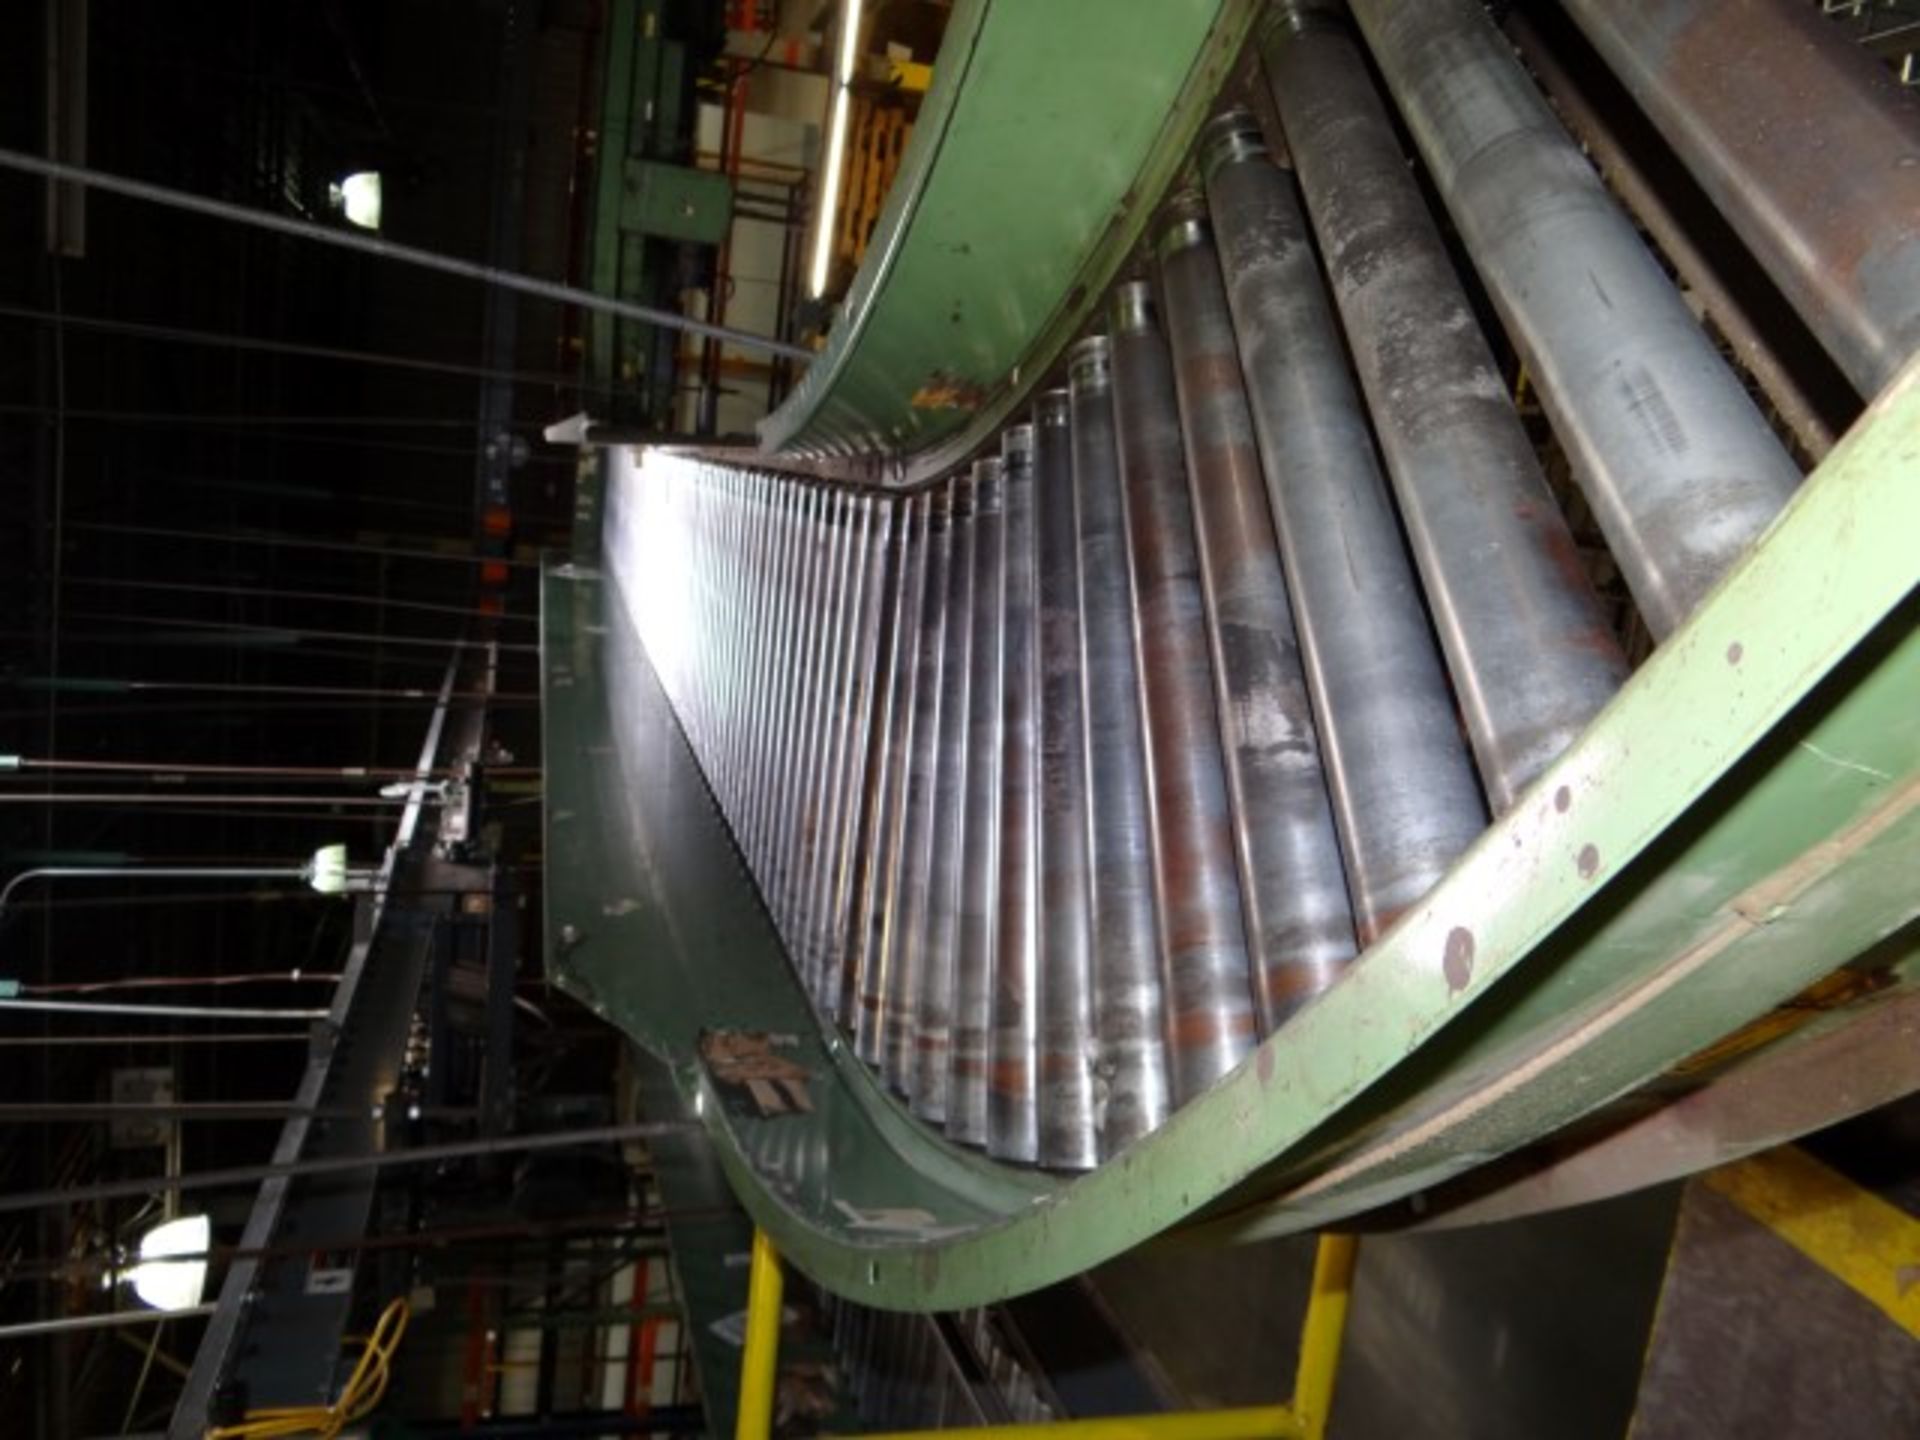 Line 5: Grocery Up Back Consisting of Approximately 200' of Roller, 270' of Roller, 12' Belt Incline - Image 9 of 10